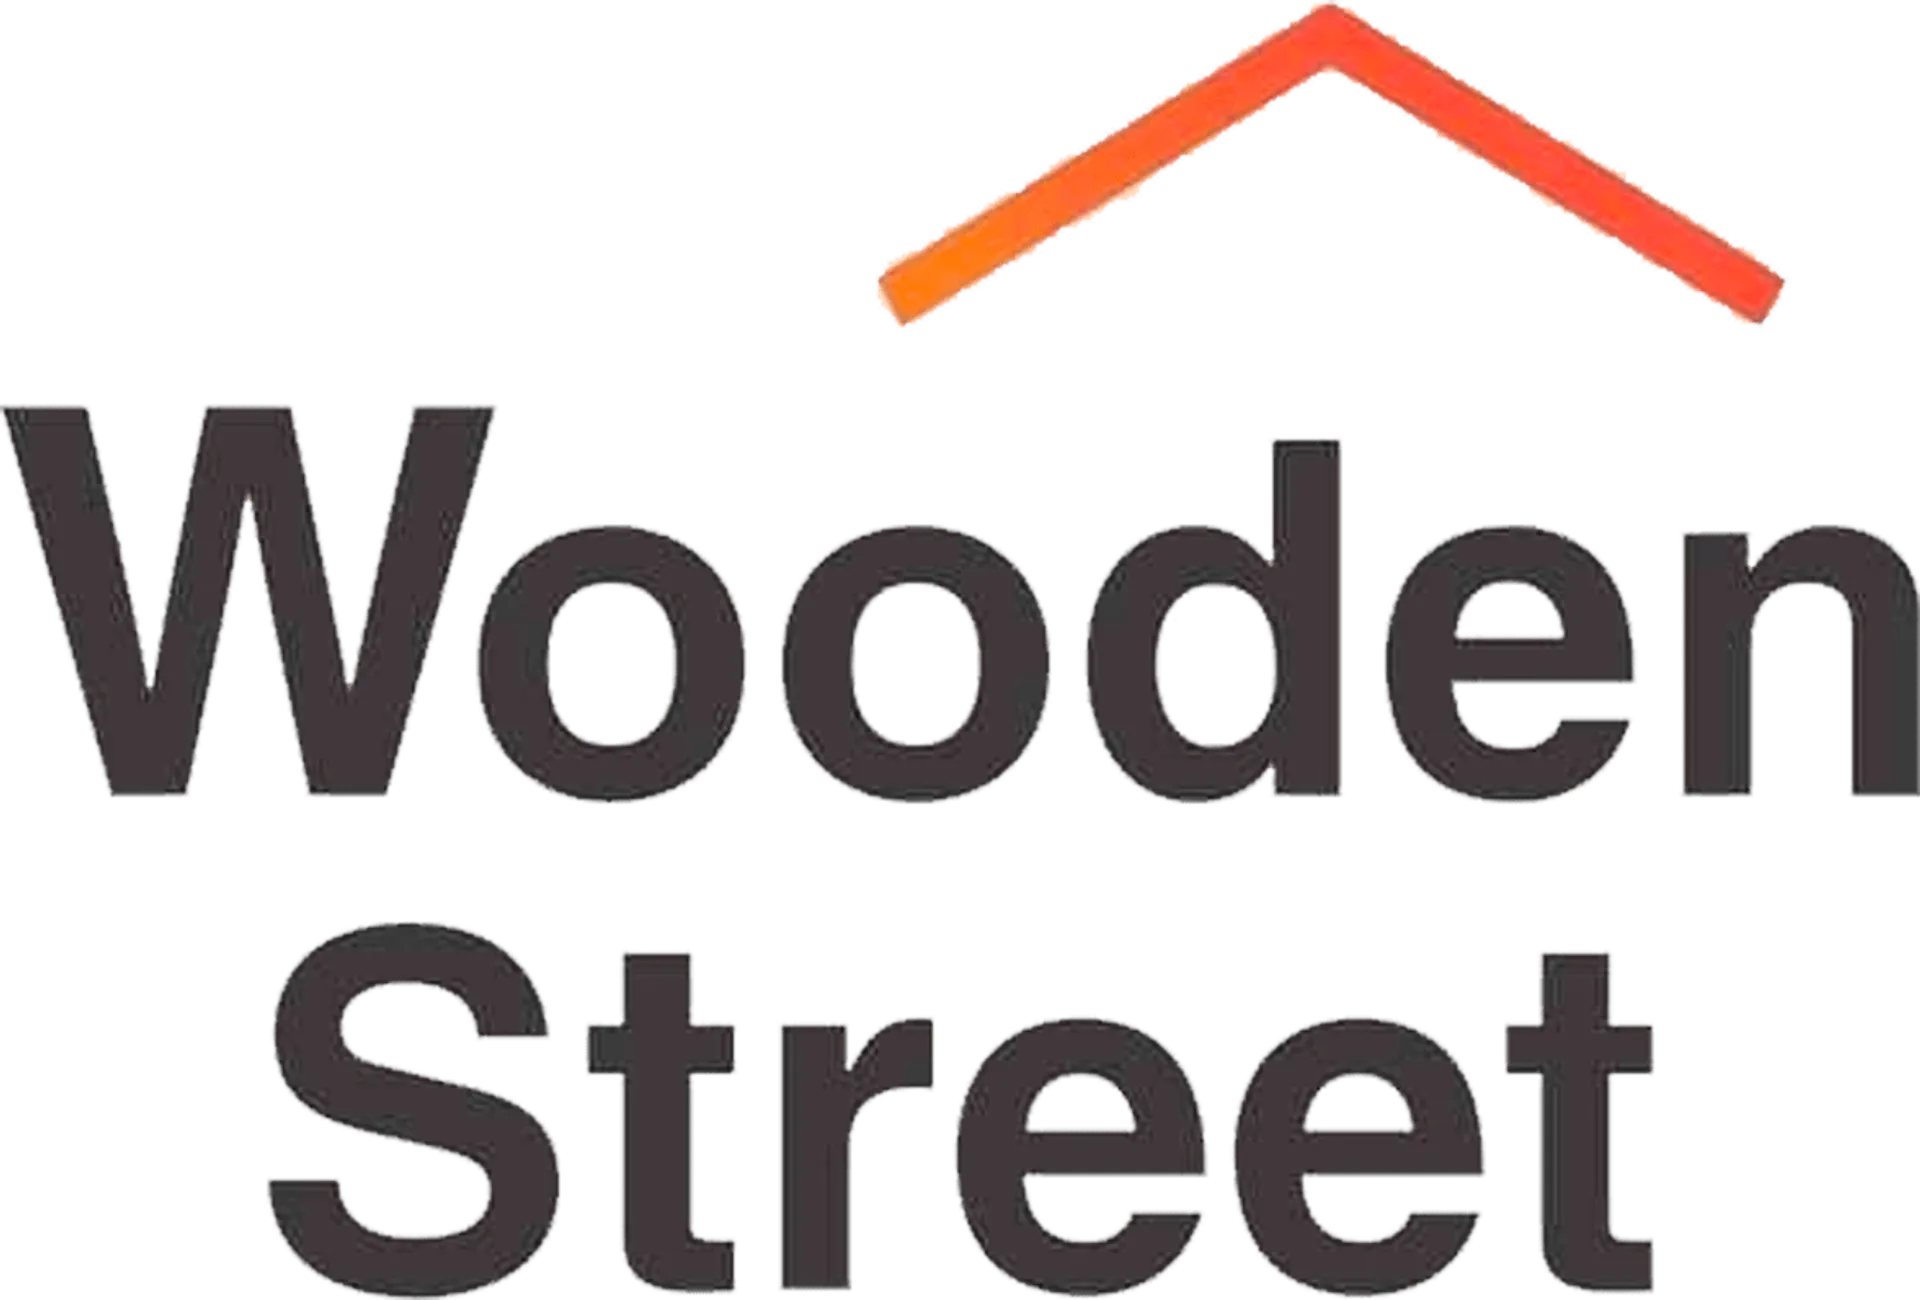 WOODEN STREET logo. Current weekly ad